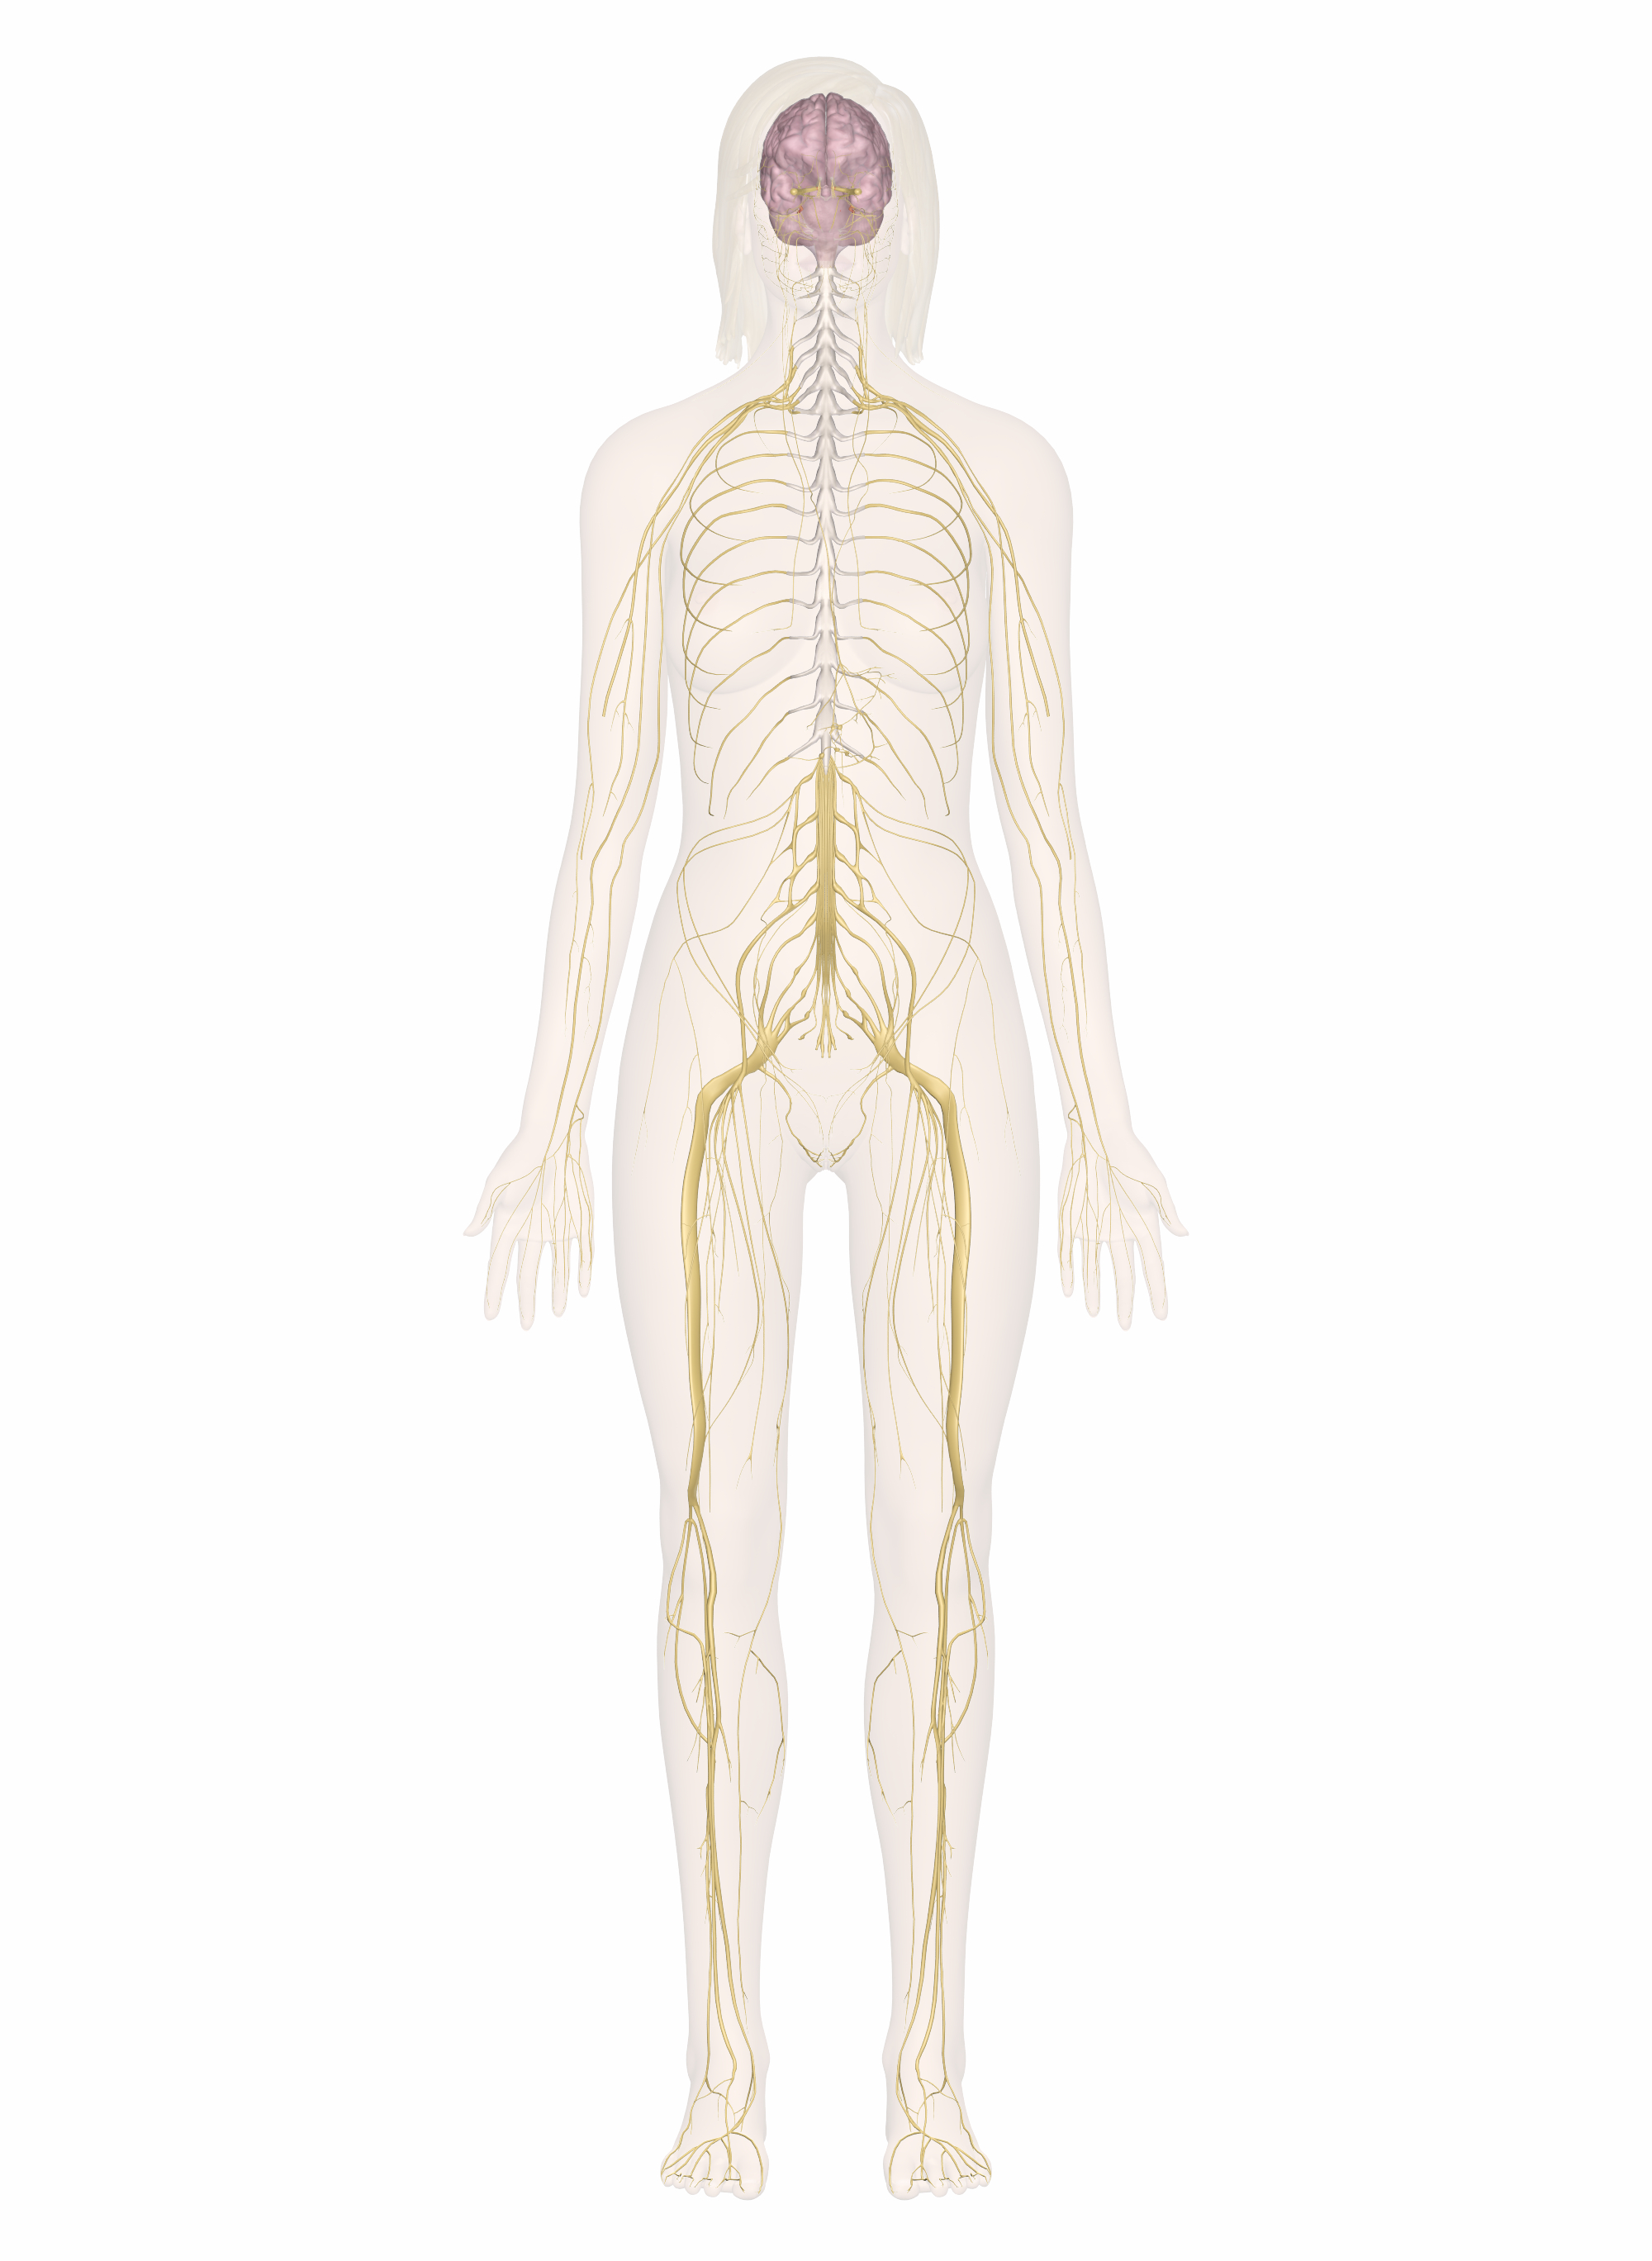 Nervous System Diagram Nervous System Explore The Nerves With Interactive Anatomy Pictures